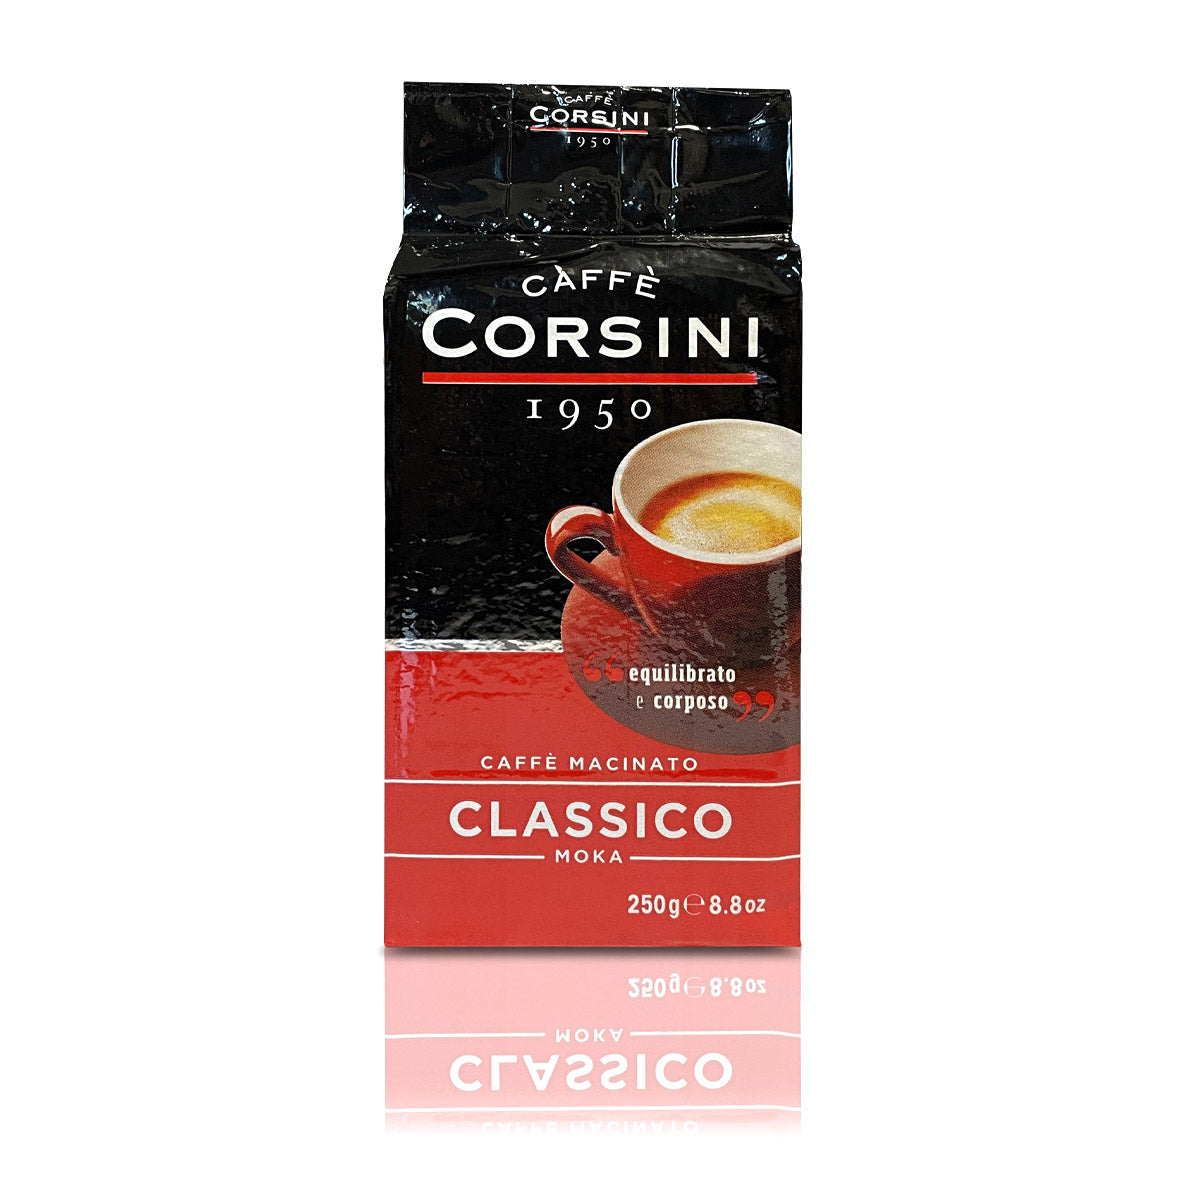 Ground coffee | Classico | Ideal for moka | 250g | Box of 20 packs